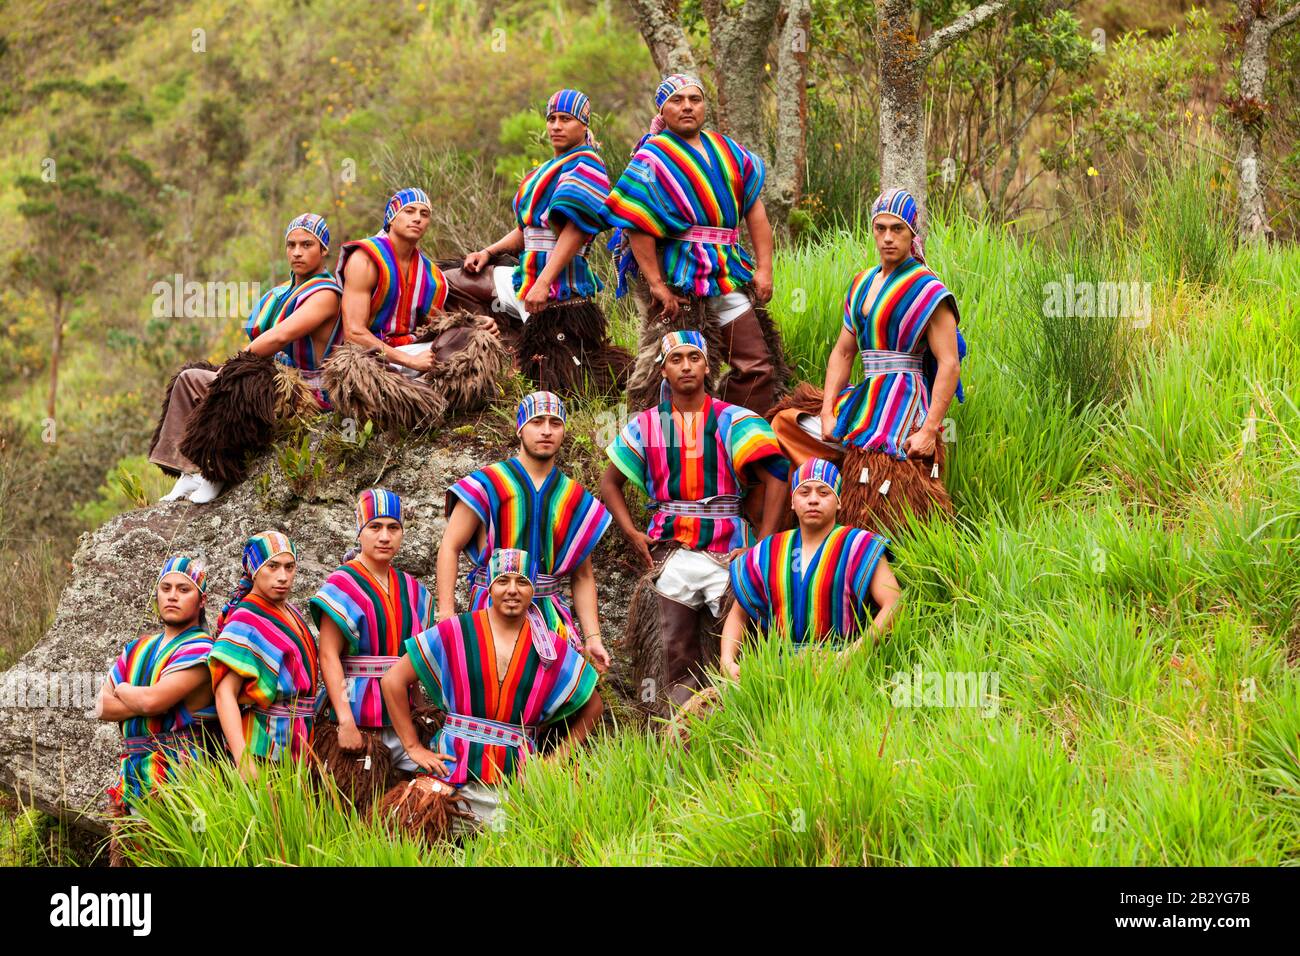 Ecuadorian Folkloric Community Dressed Up In Traditional Costumes Outside Shot Stock Photo